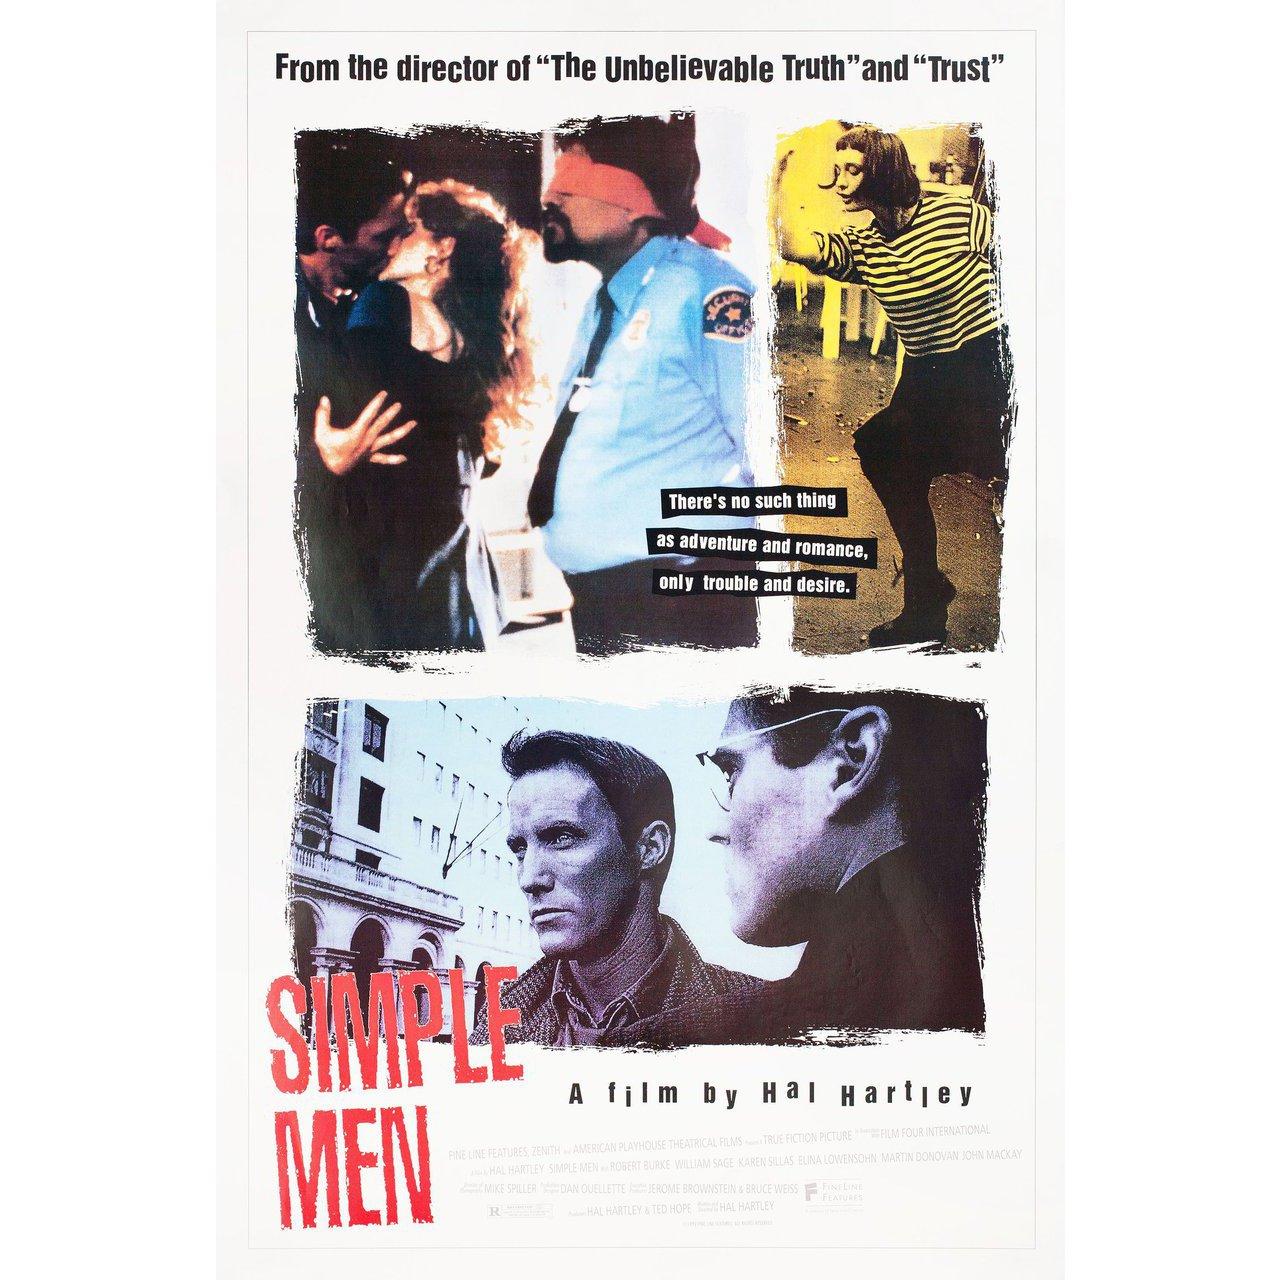 Original 1992 U.S. one sheet poster for the film Simple Men directed by Hal Hartley with Robert John Burke / Bill Sage / Karen Sillas / Elina Lowensohn. Very Good-Fine condition, rolled. Please note: the size is stated in inches and the actual size